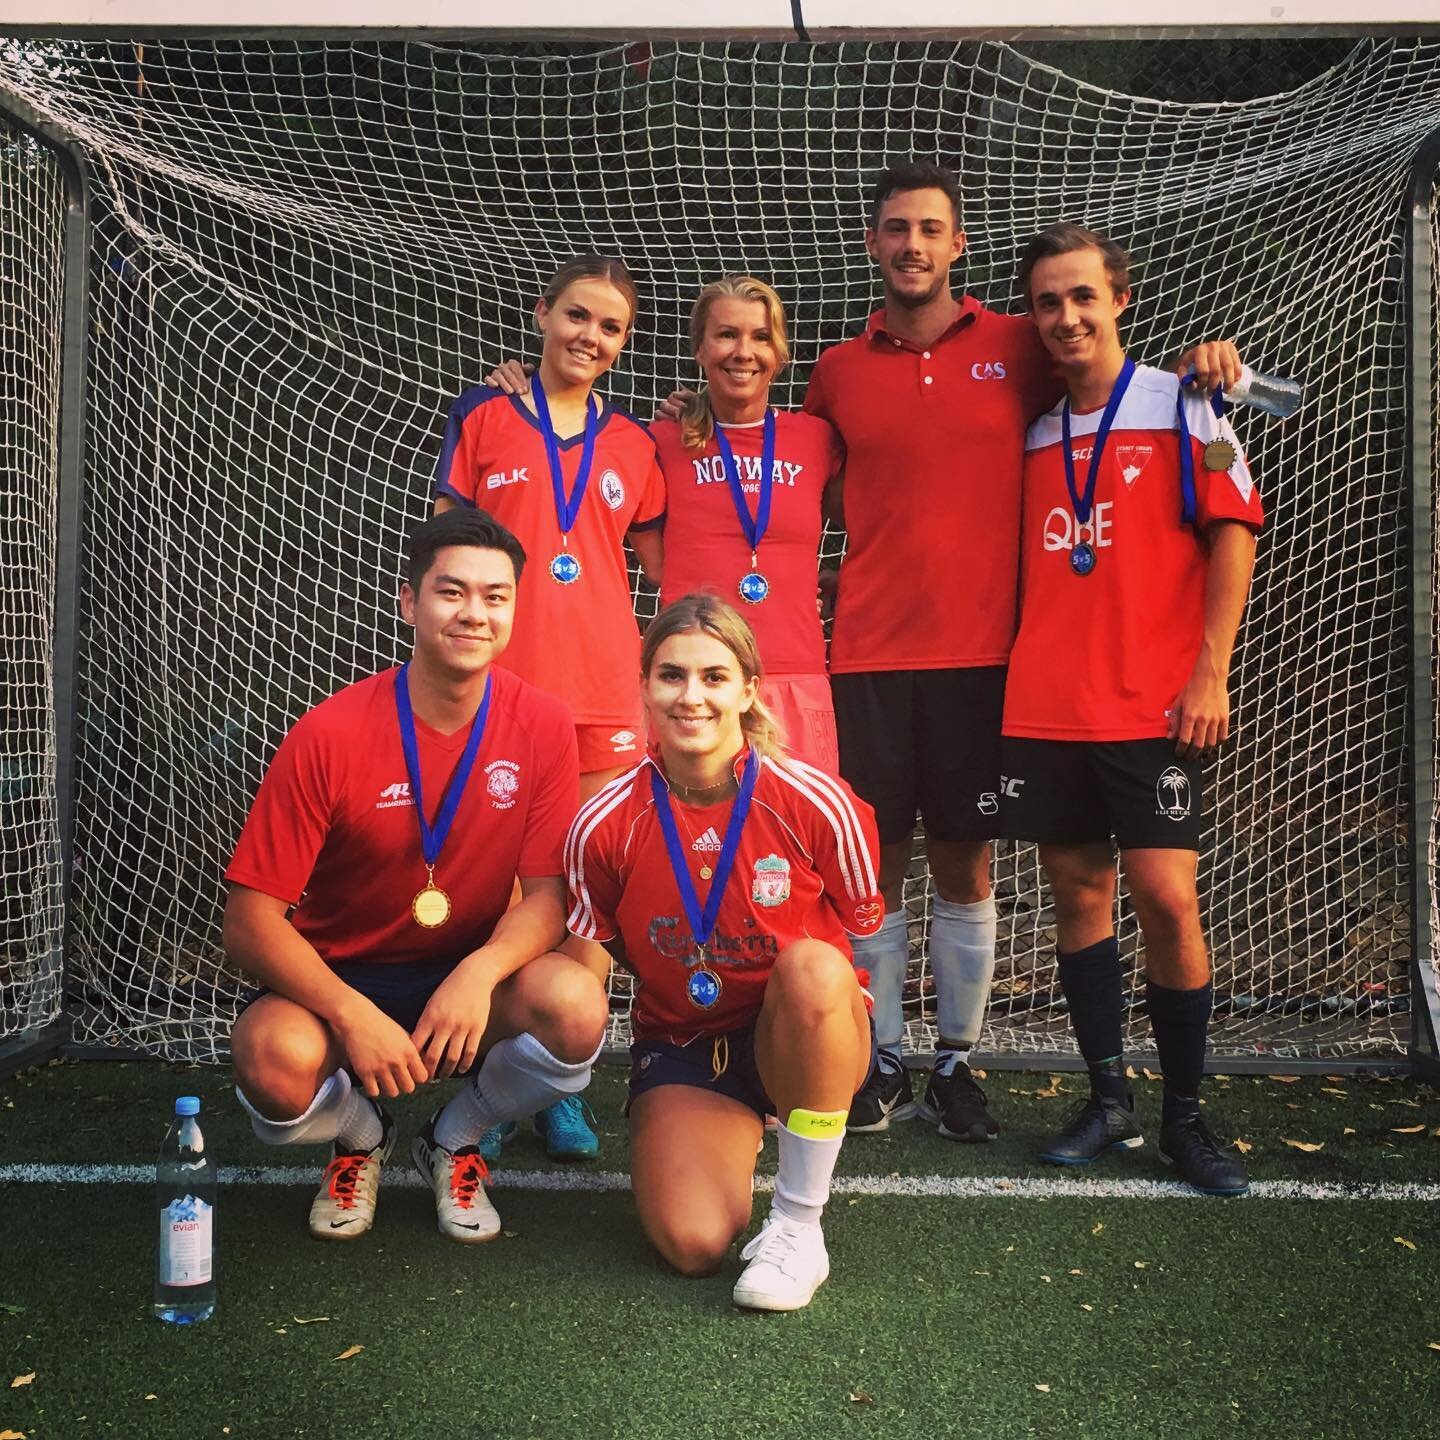 Some really great games played last night to wrap up our Spring '19 season. Congratulations to our Tuesday mixed div 1, mixed div 2 and men's div 2 medalists.

Competitions will return in January for our Summer '20 season. Check out our website for d